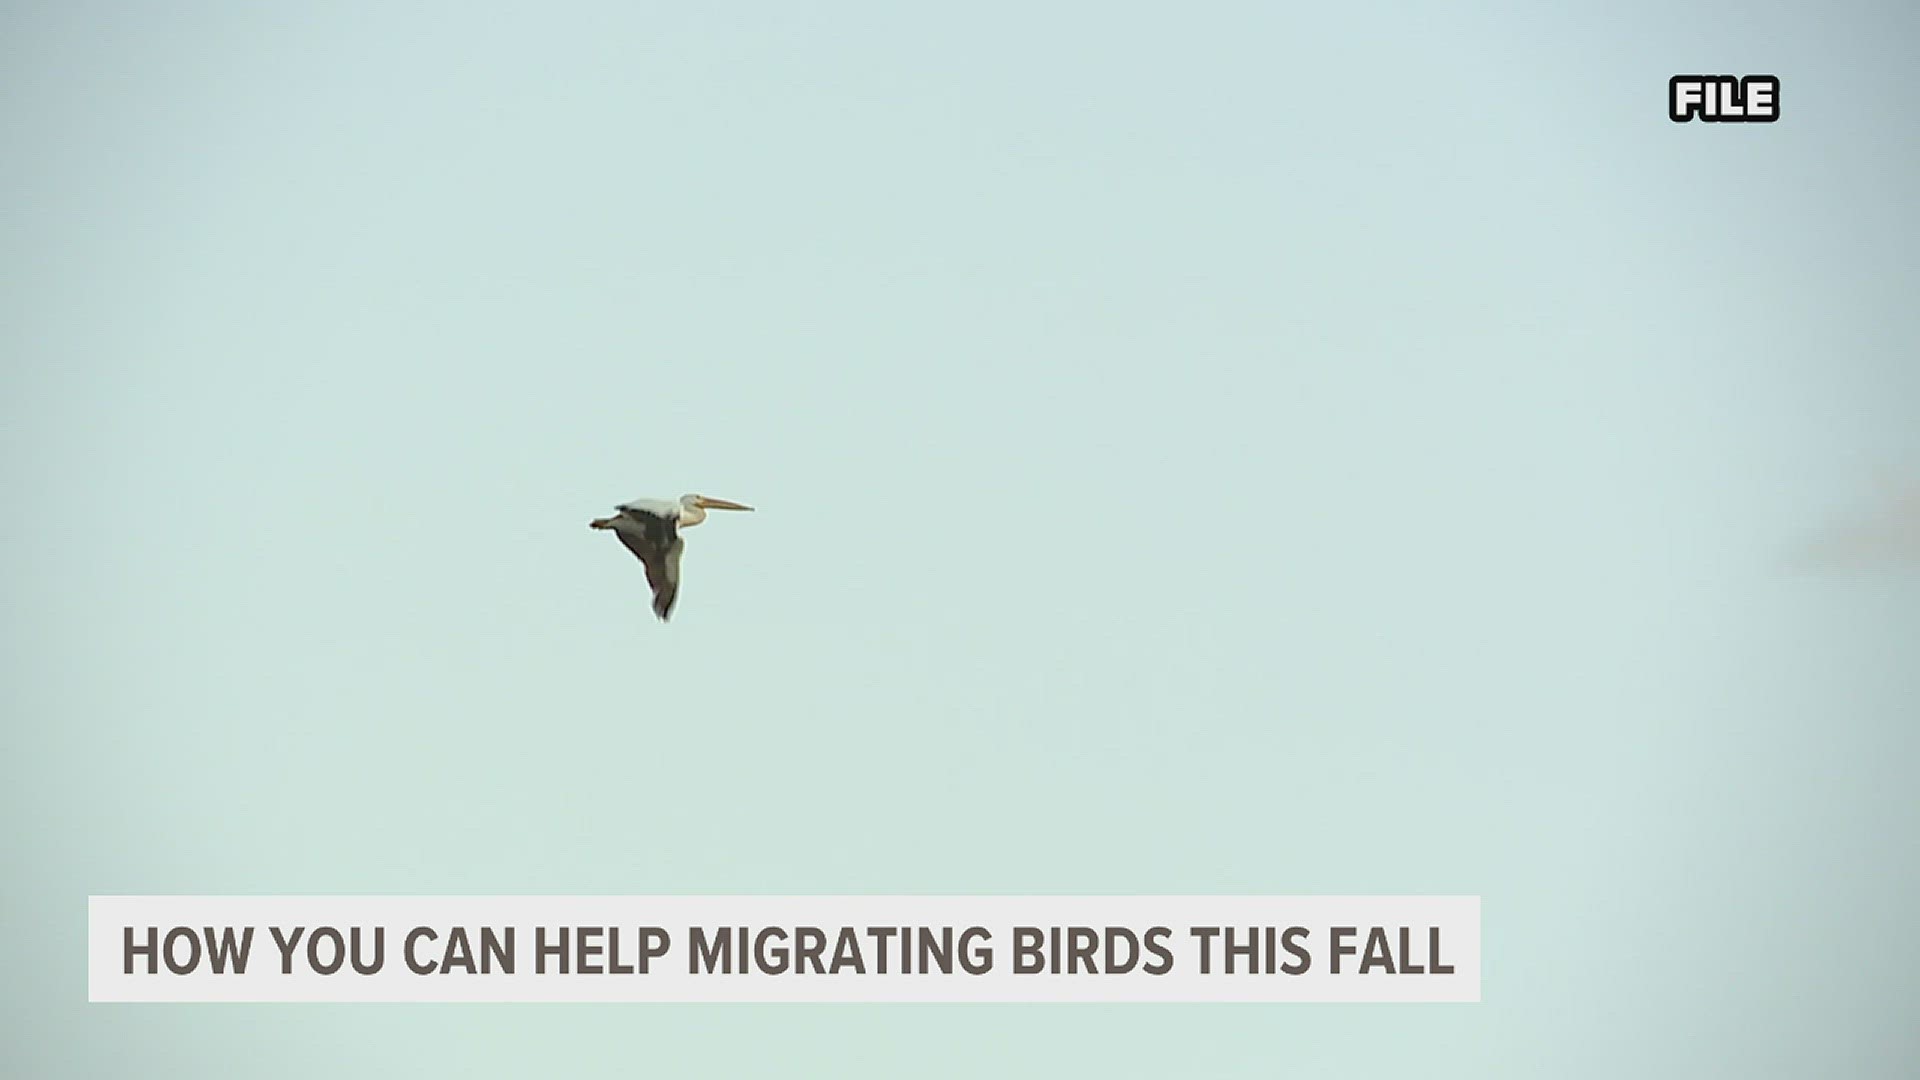 The Iowa Department of Natural Resources is asking people to turn off the lights at their homes or businesses to help the birds migrate safely.